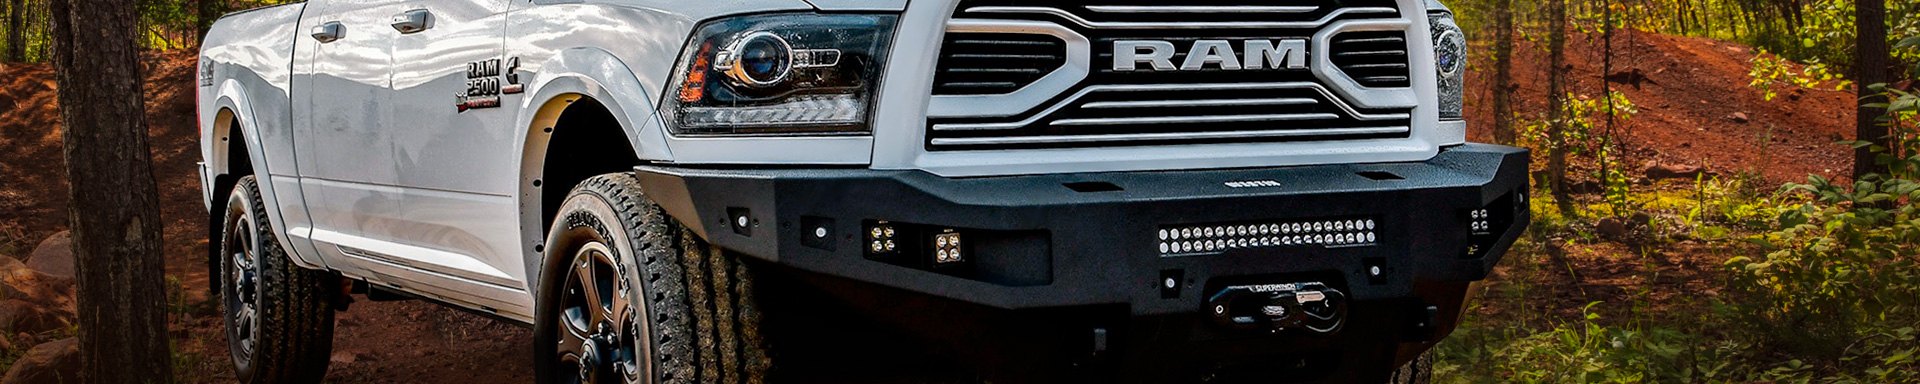 Westin Pro-Series Bumpers Are Now Available For 2010-2018 Ram Trucks